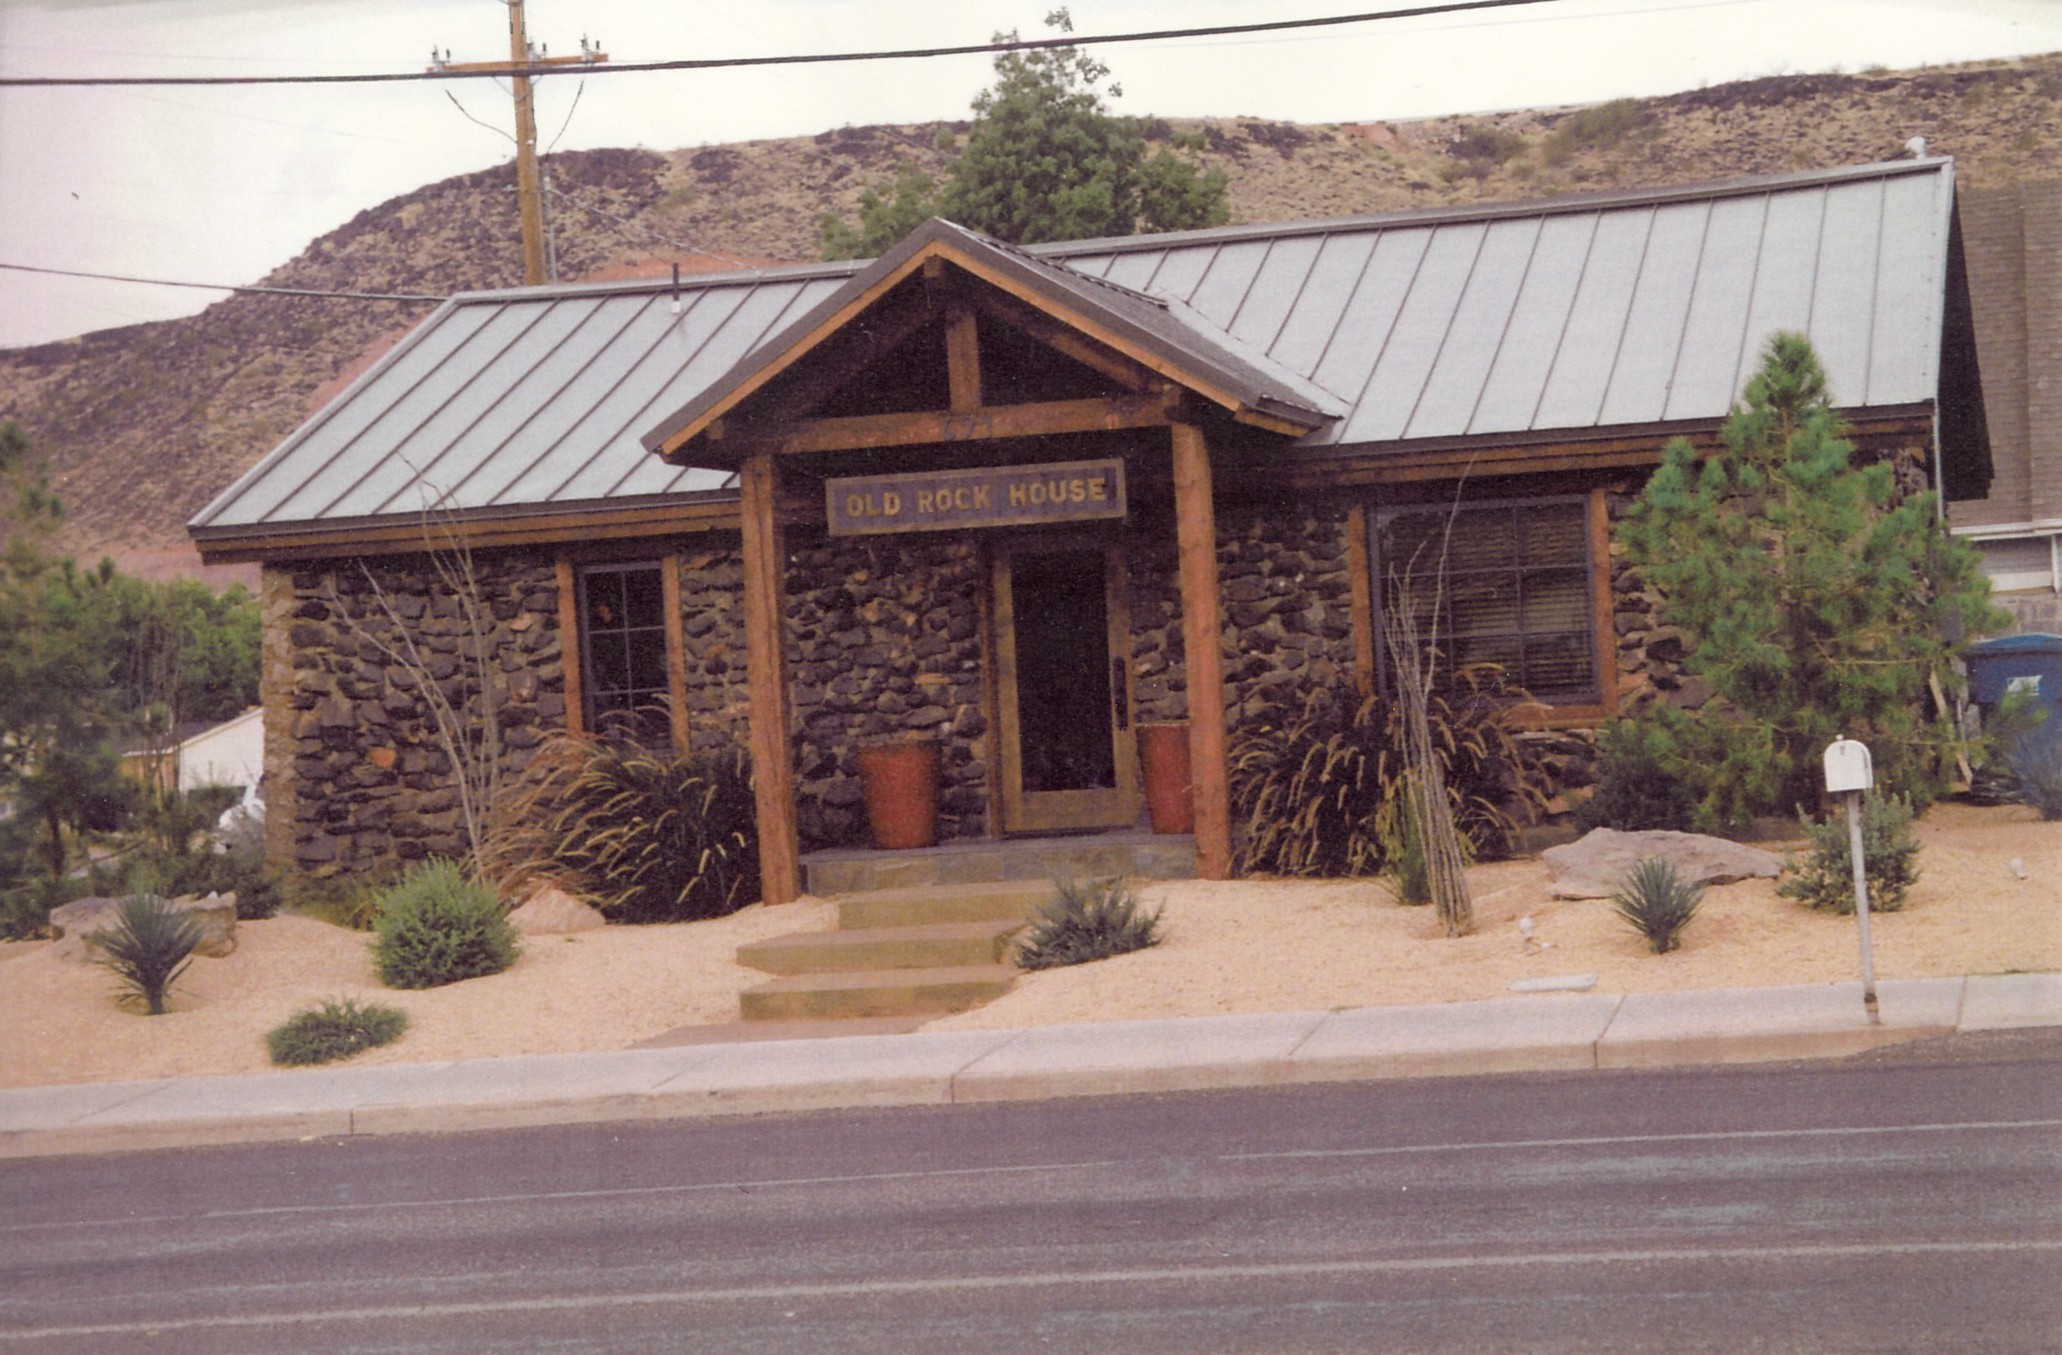 Old Rock House in St. George